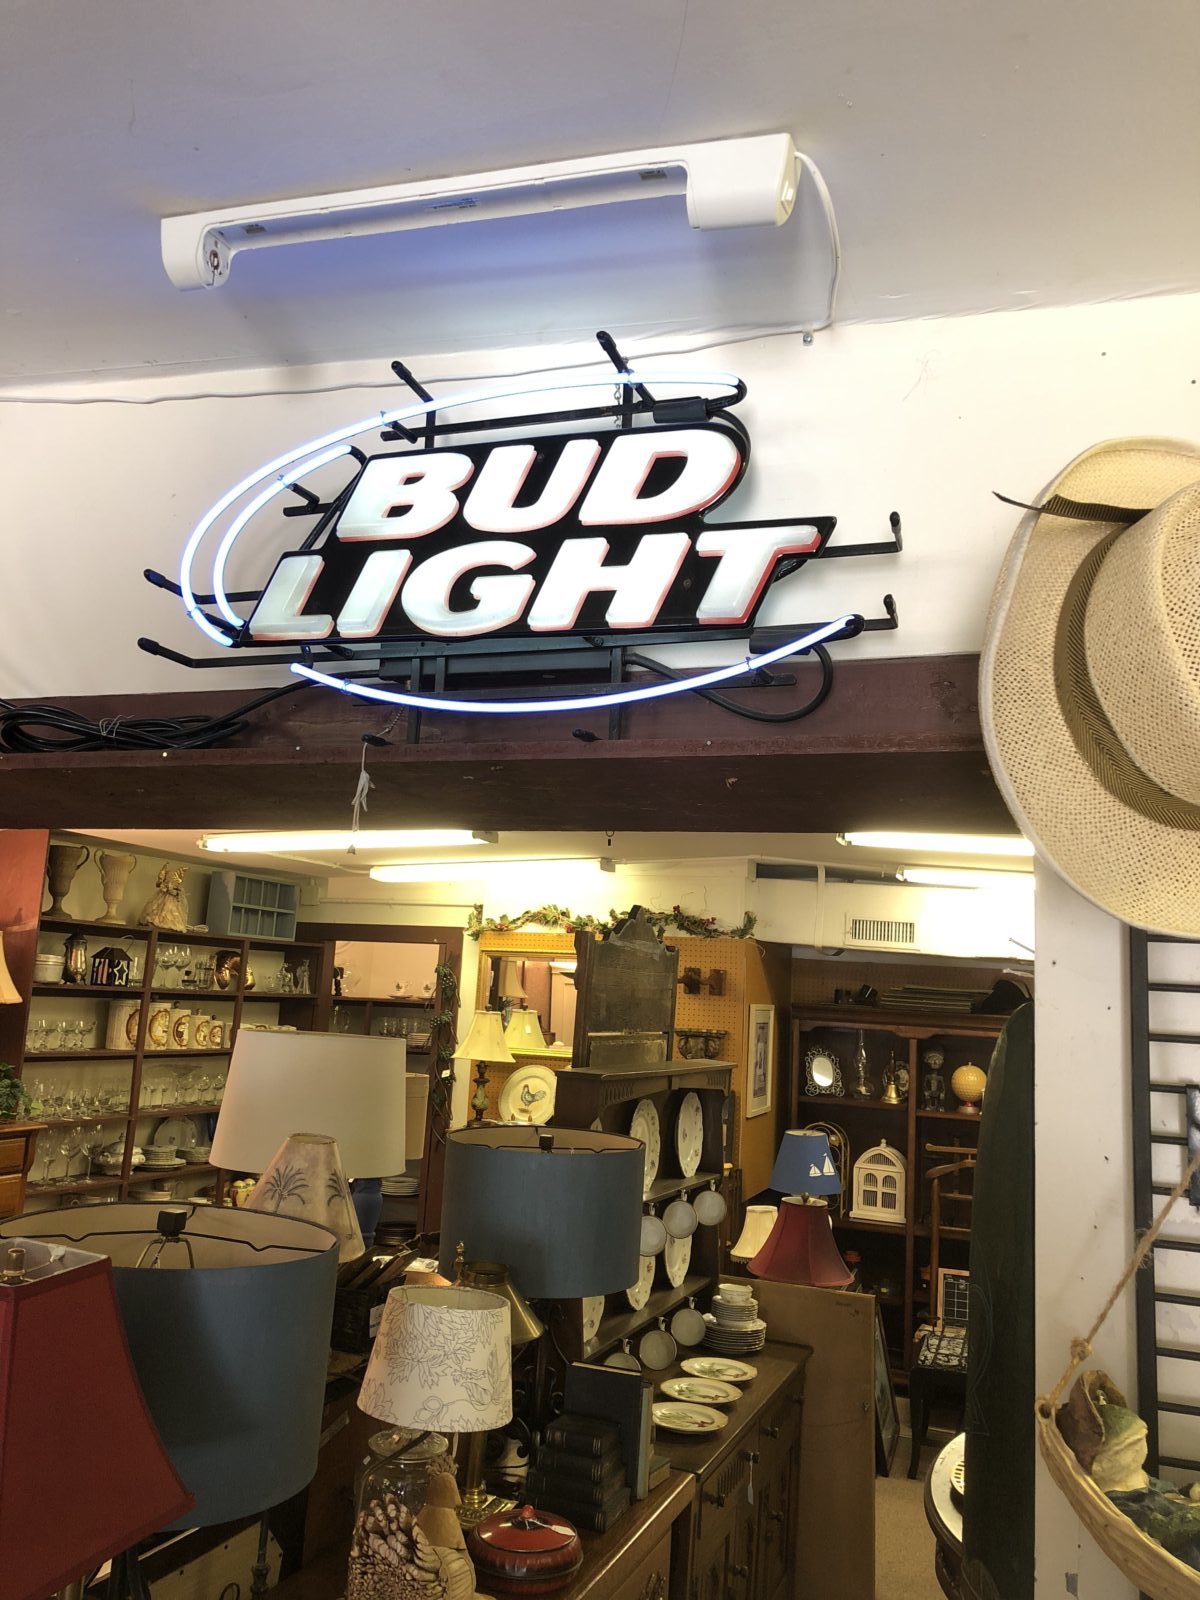 Neon Bud Light Sign • Neon Bud Light Sign in excellent condition.